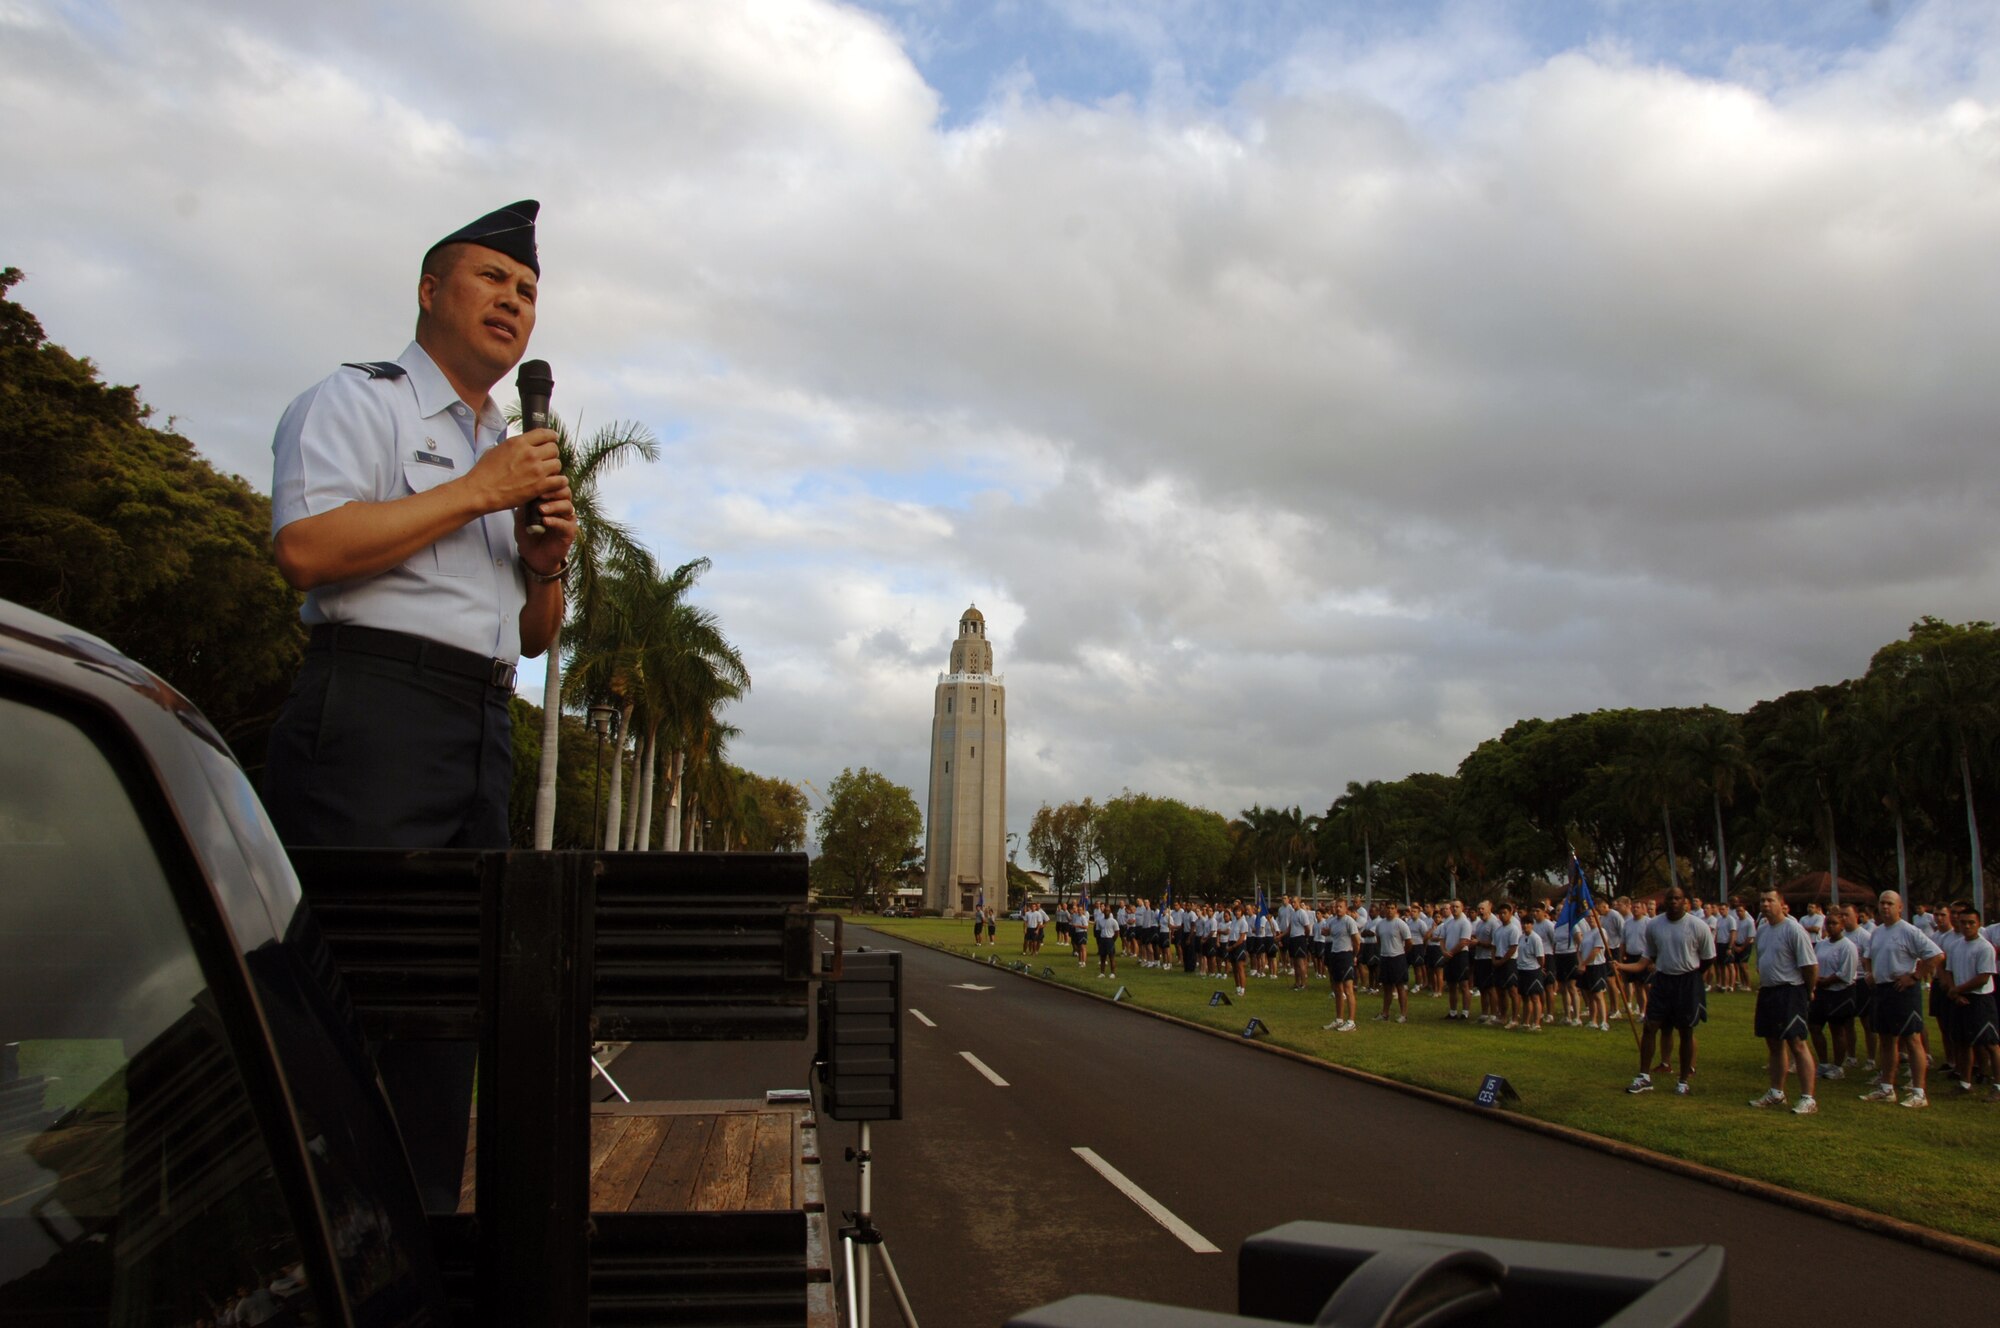 Col. Giovanni Tuck, 15th Airlift Wing commander, addresses the crowd of runners before the "Warrior Run" May 7 at Joint Base Pearl Harbor Hickam, Hi. The run was the last Col. Tuck will be a part of as commander of the 15th AW. (U.S. Air Force photo by Senior Airman Nathan Allen)